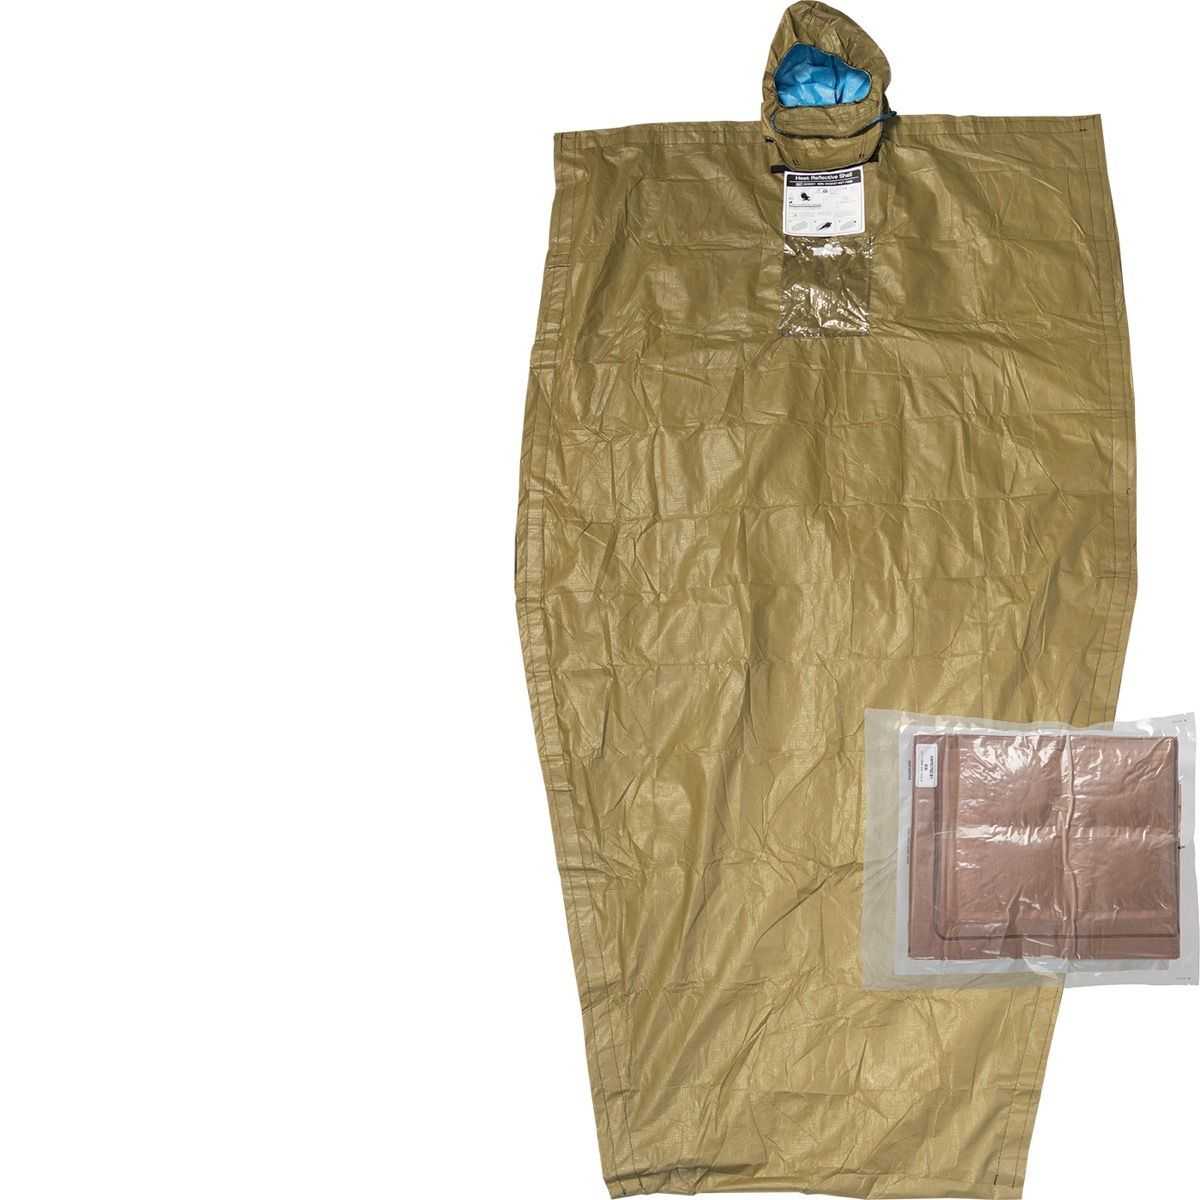 North American Rescue - HPMK Blanket , Heat Reflective Shell [ HRS ]